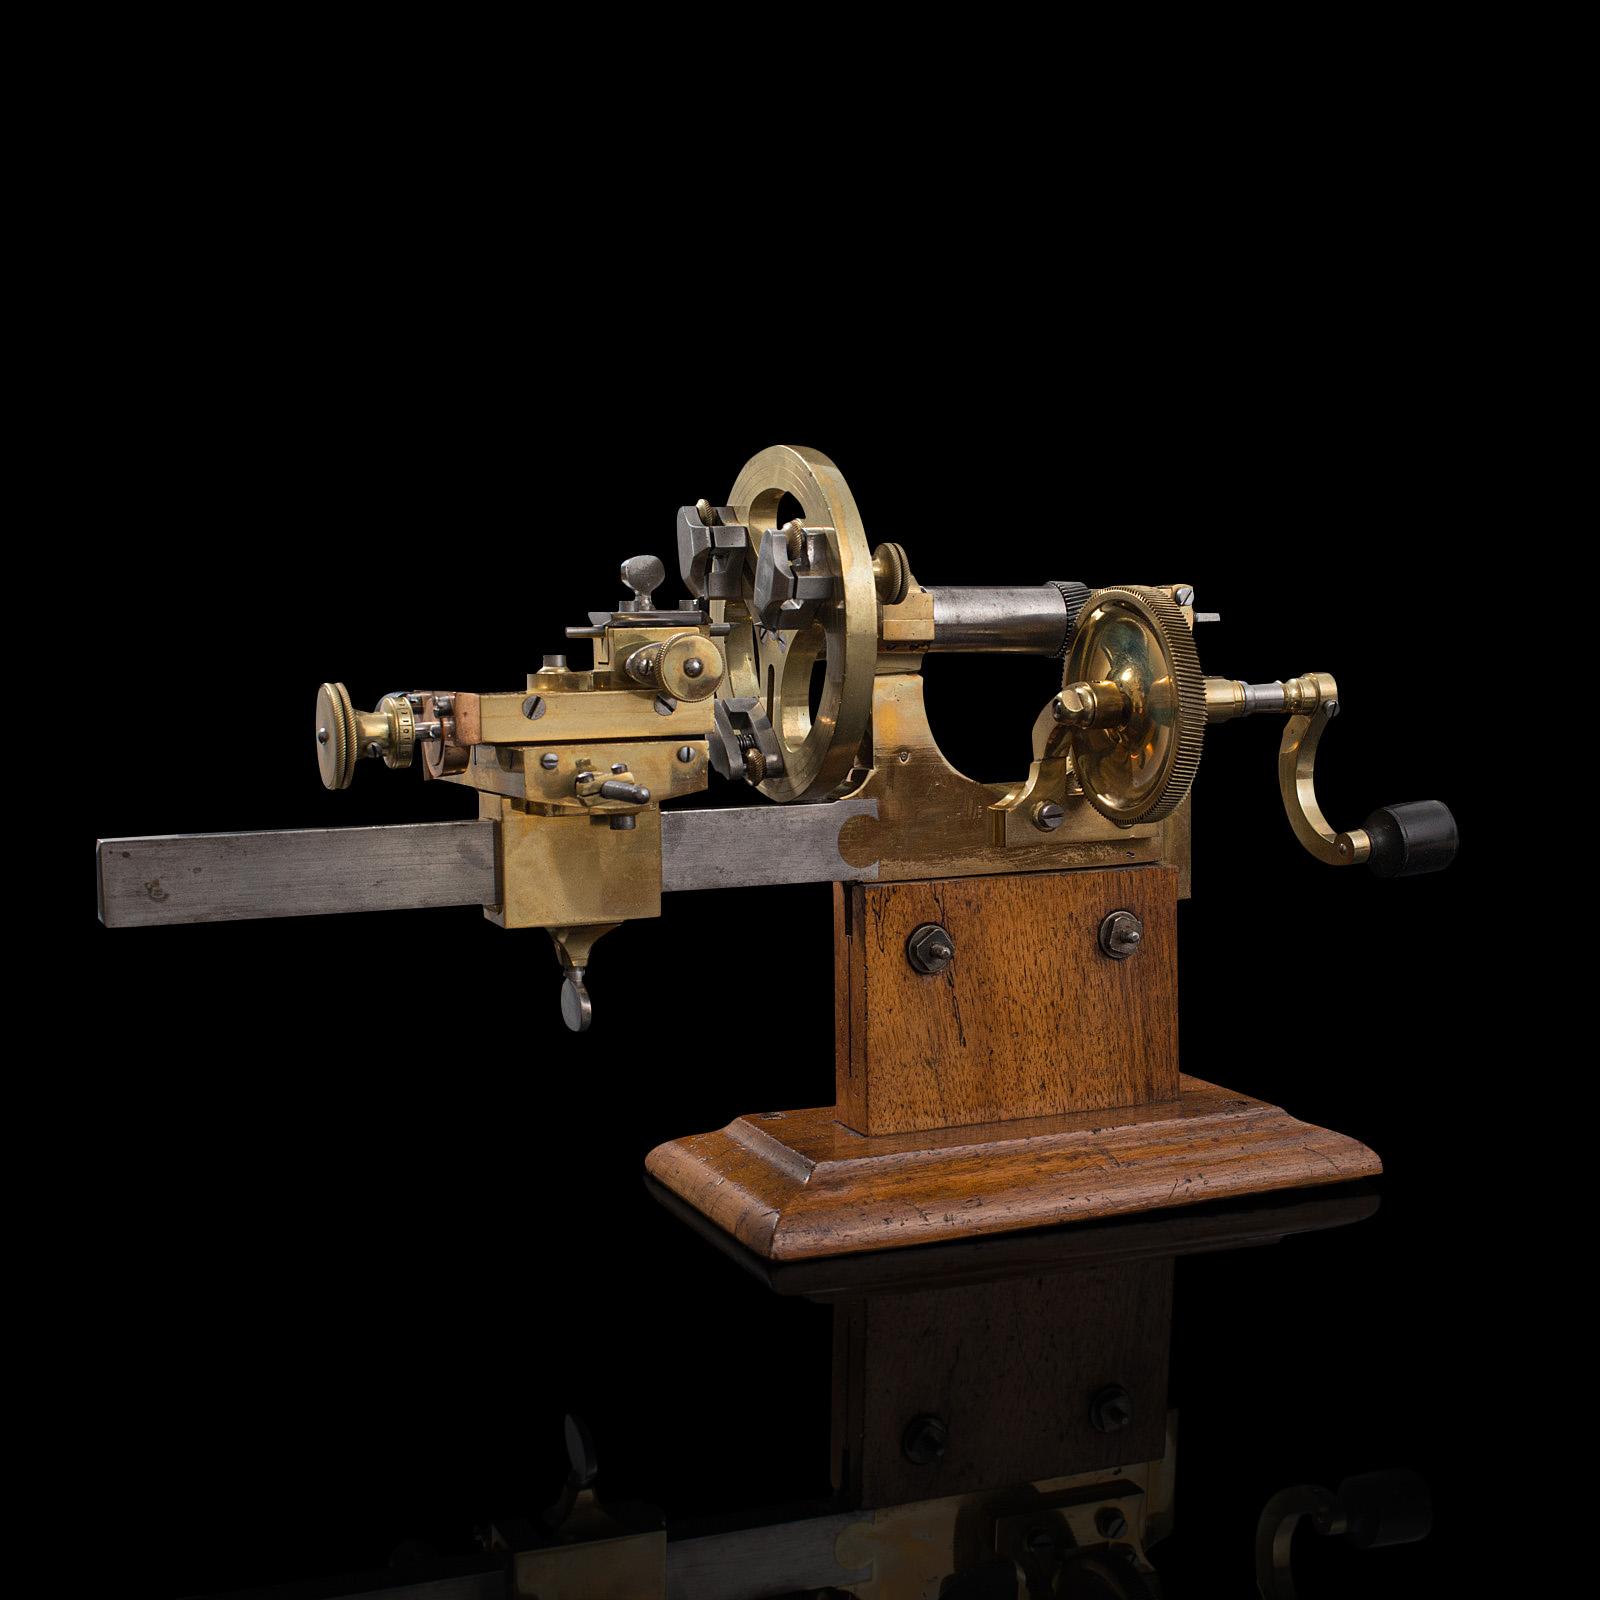 This is a fantastic antique watchmaker's lathe. A Swiss, quality brass, copper and stainless steel precision instrument, dating to the late 19th century, circa 1900.

An exquisite and rare antique lathe with quality accessories and carry